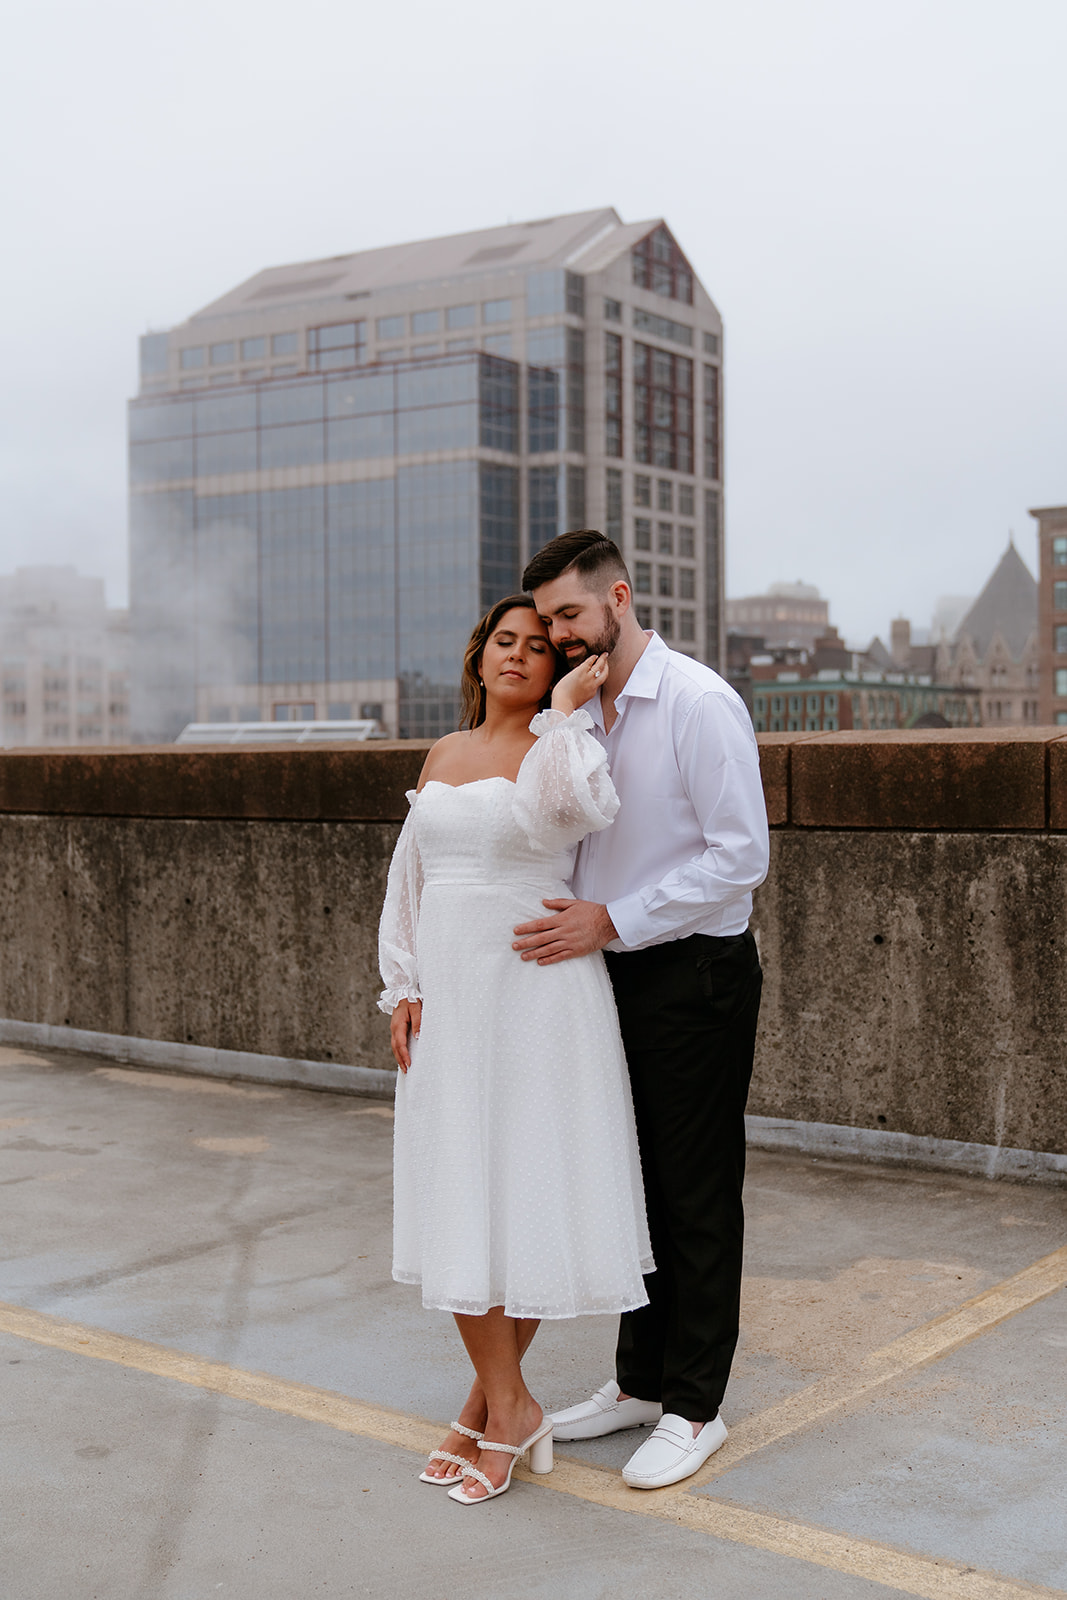 A couple stands on a rooftop parking garage in formal attire;Buildings and a foggy sky are visible in the background